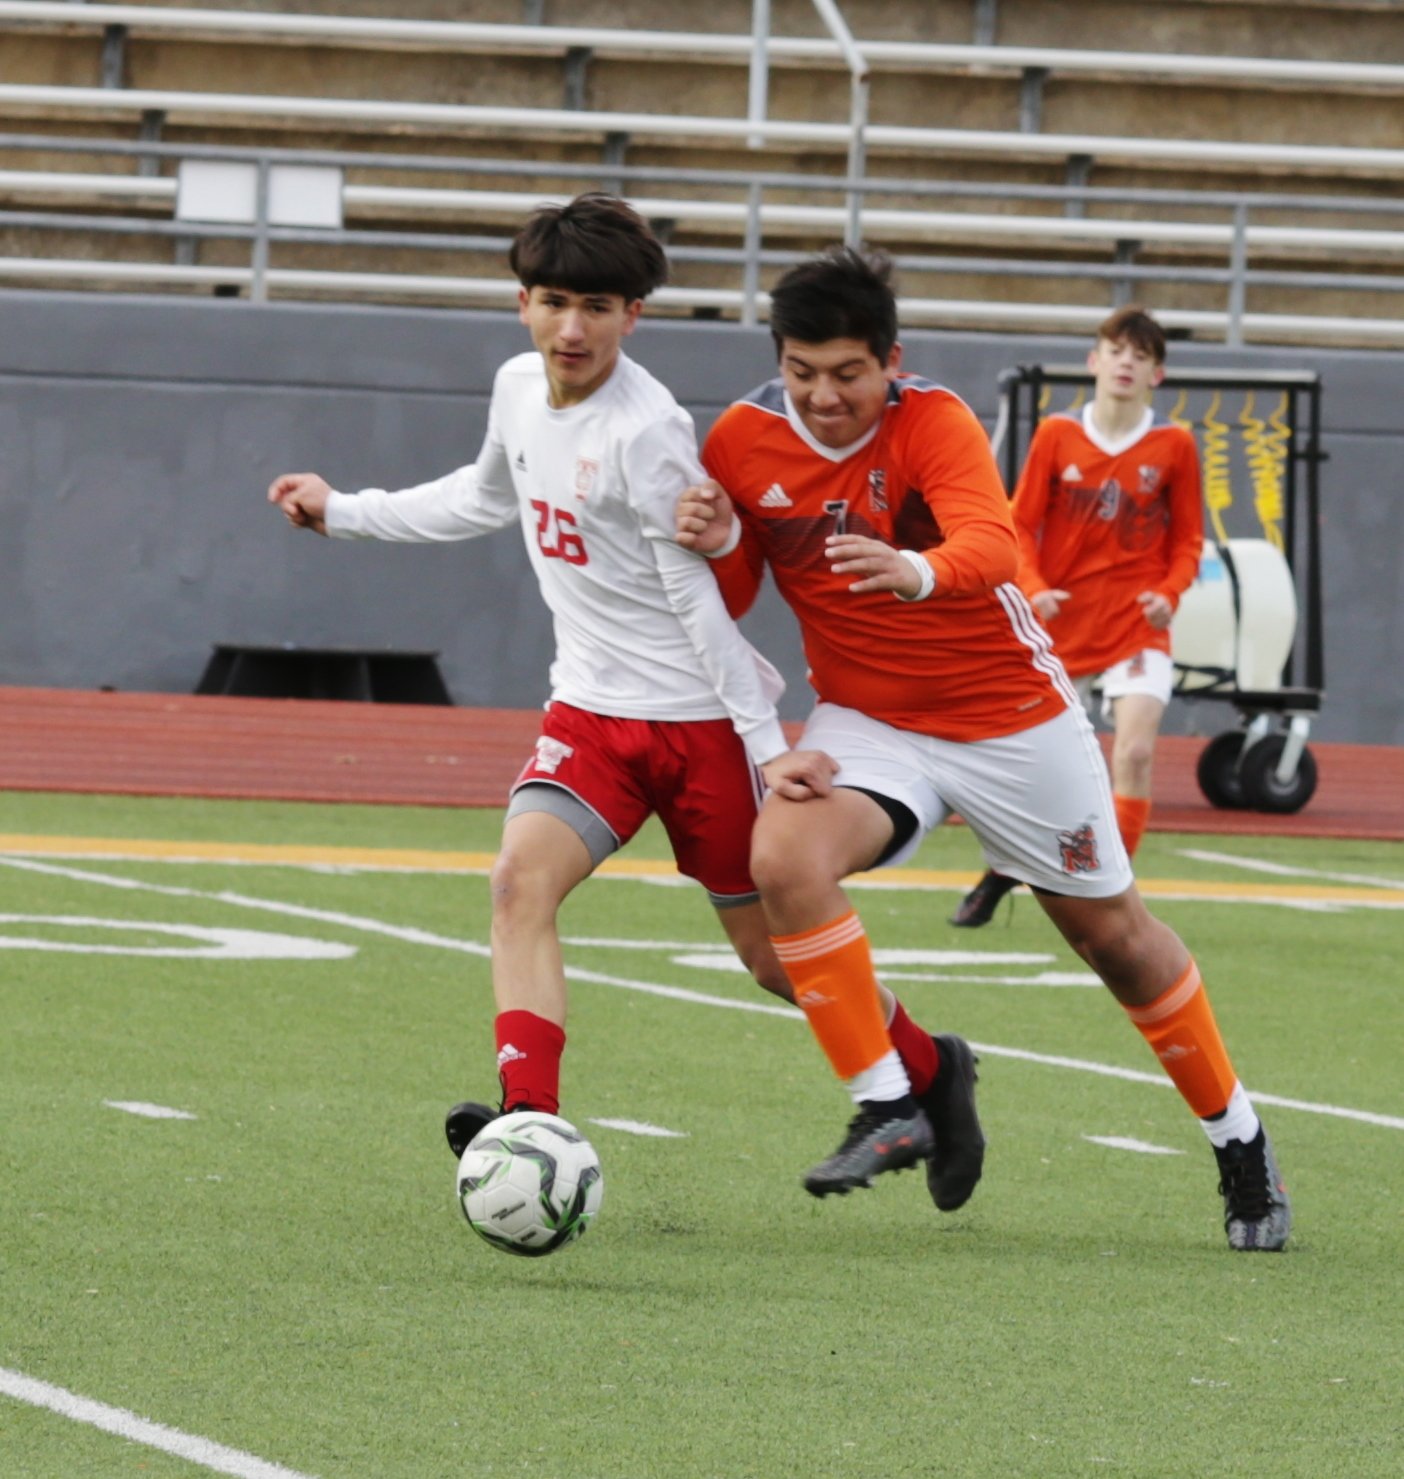 Mineola’s Christian Martinez competes for a ball in the midfield.